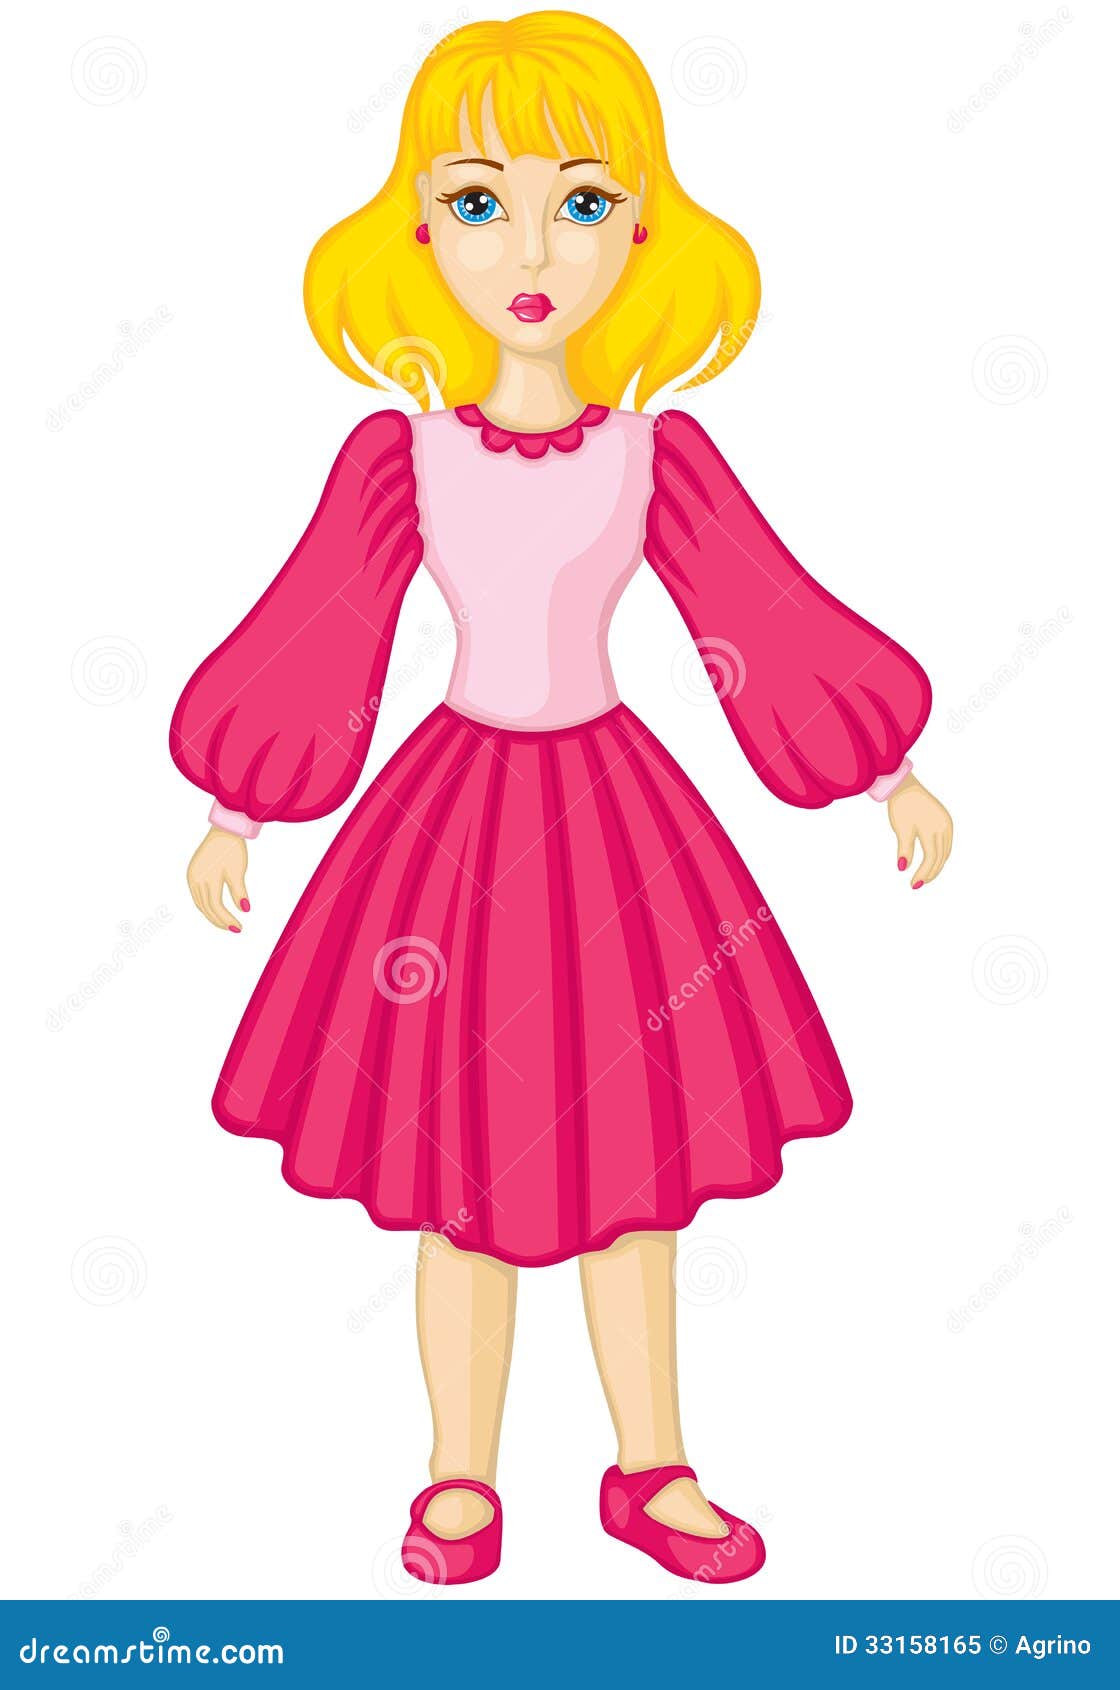 Girl in pink dress stock vector. Illustration of pretty - 33158165